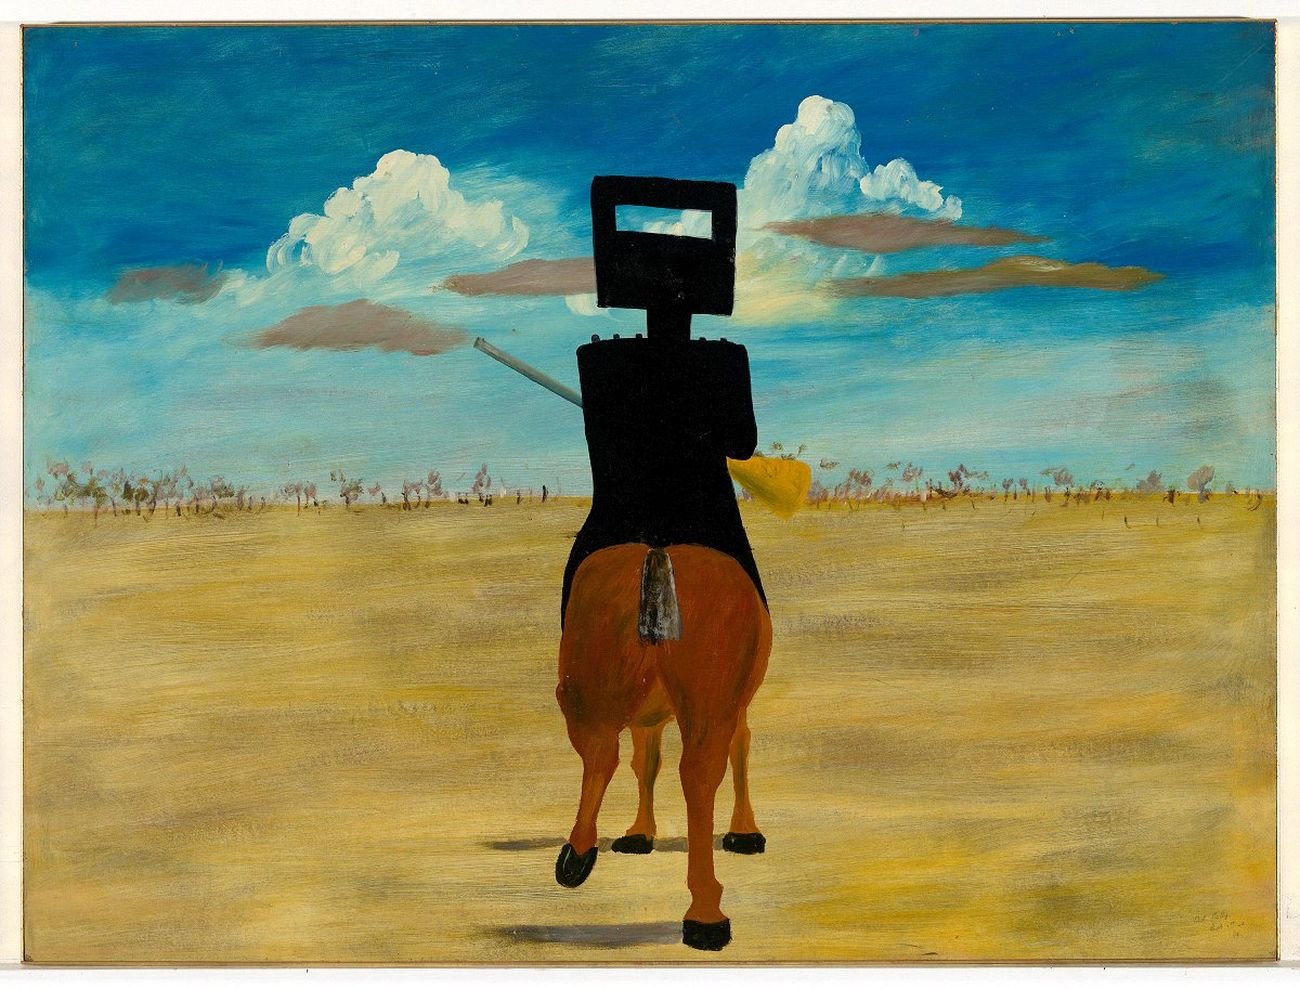 Sidney Nolan, Ned Kelly, 1946. National Gallery of Australia, Canberra